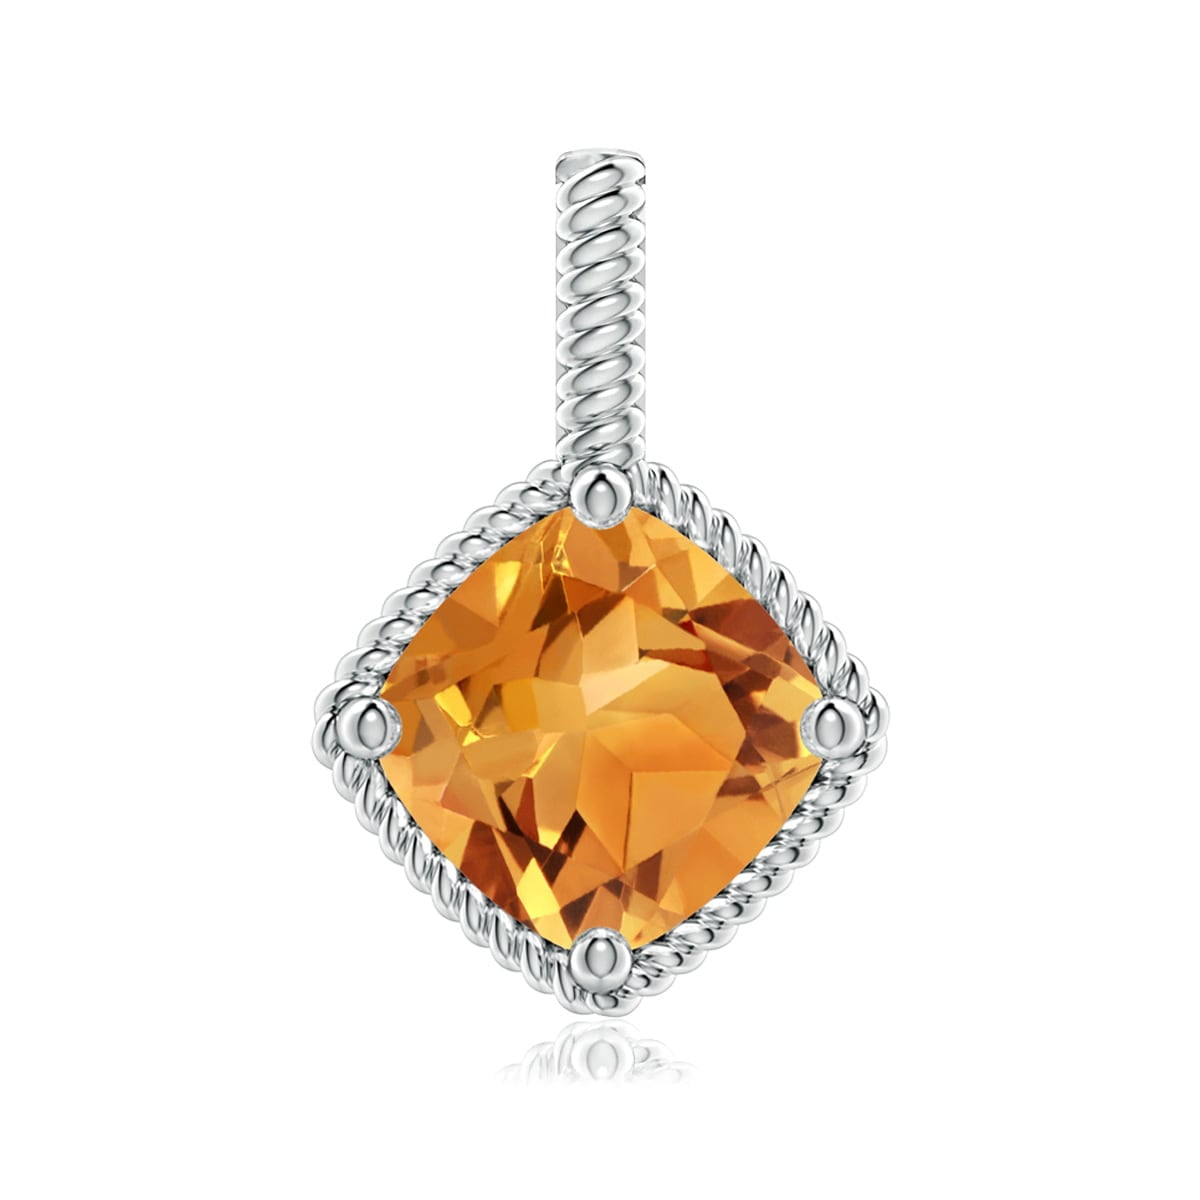 New 925 Sterling Silver Oval Citrine Drop Pendant Necklace Stone Cttw 1.9 